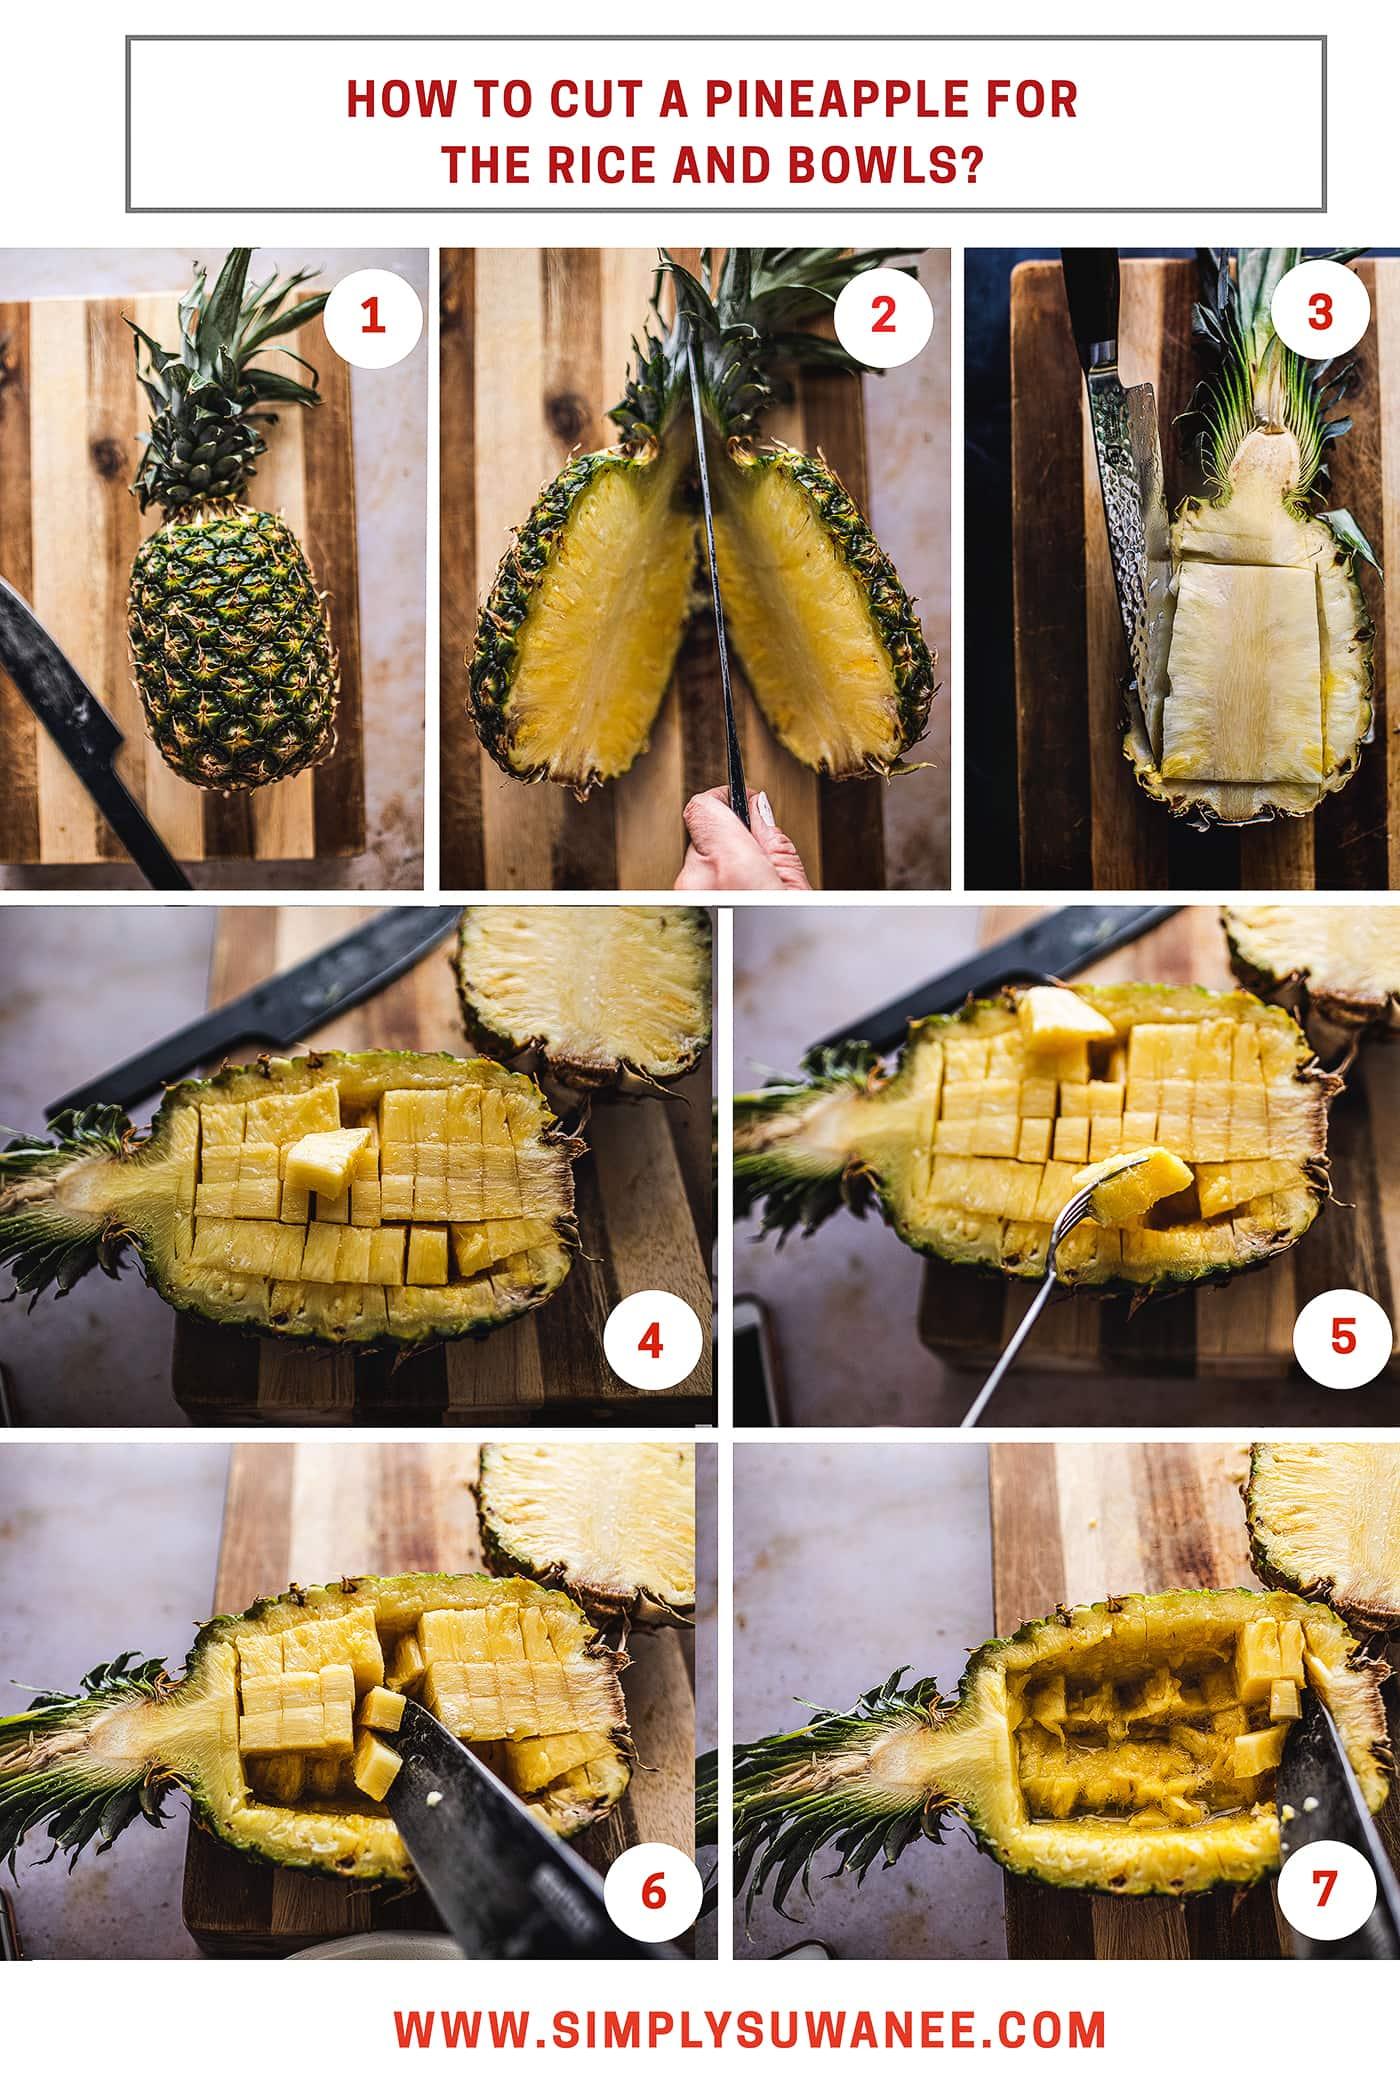 Have you ever wondered how to make pineapple-shaped fruit bowls? Wonder no more! I’m going to show you step-by-step pictures of exactly how to cut a pineapple for my fried rice recipe and bowls. #pineapples #howtocutpineapple #cuttingpineapple#pineapplebowl #cuttingpineapplebowl